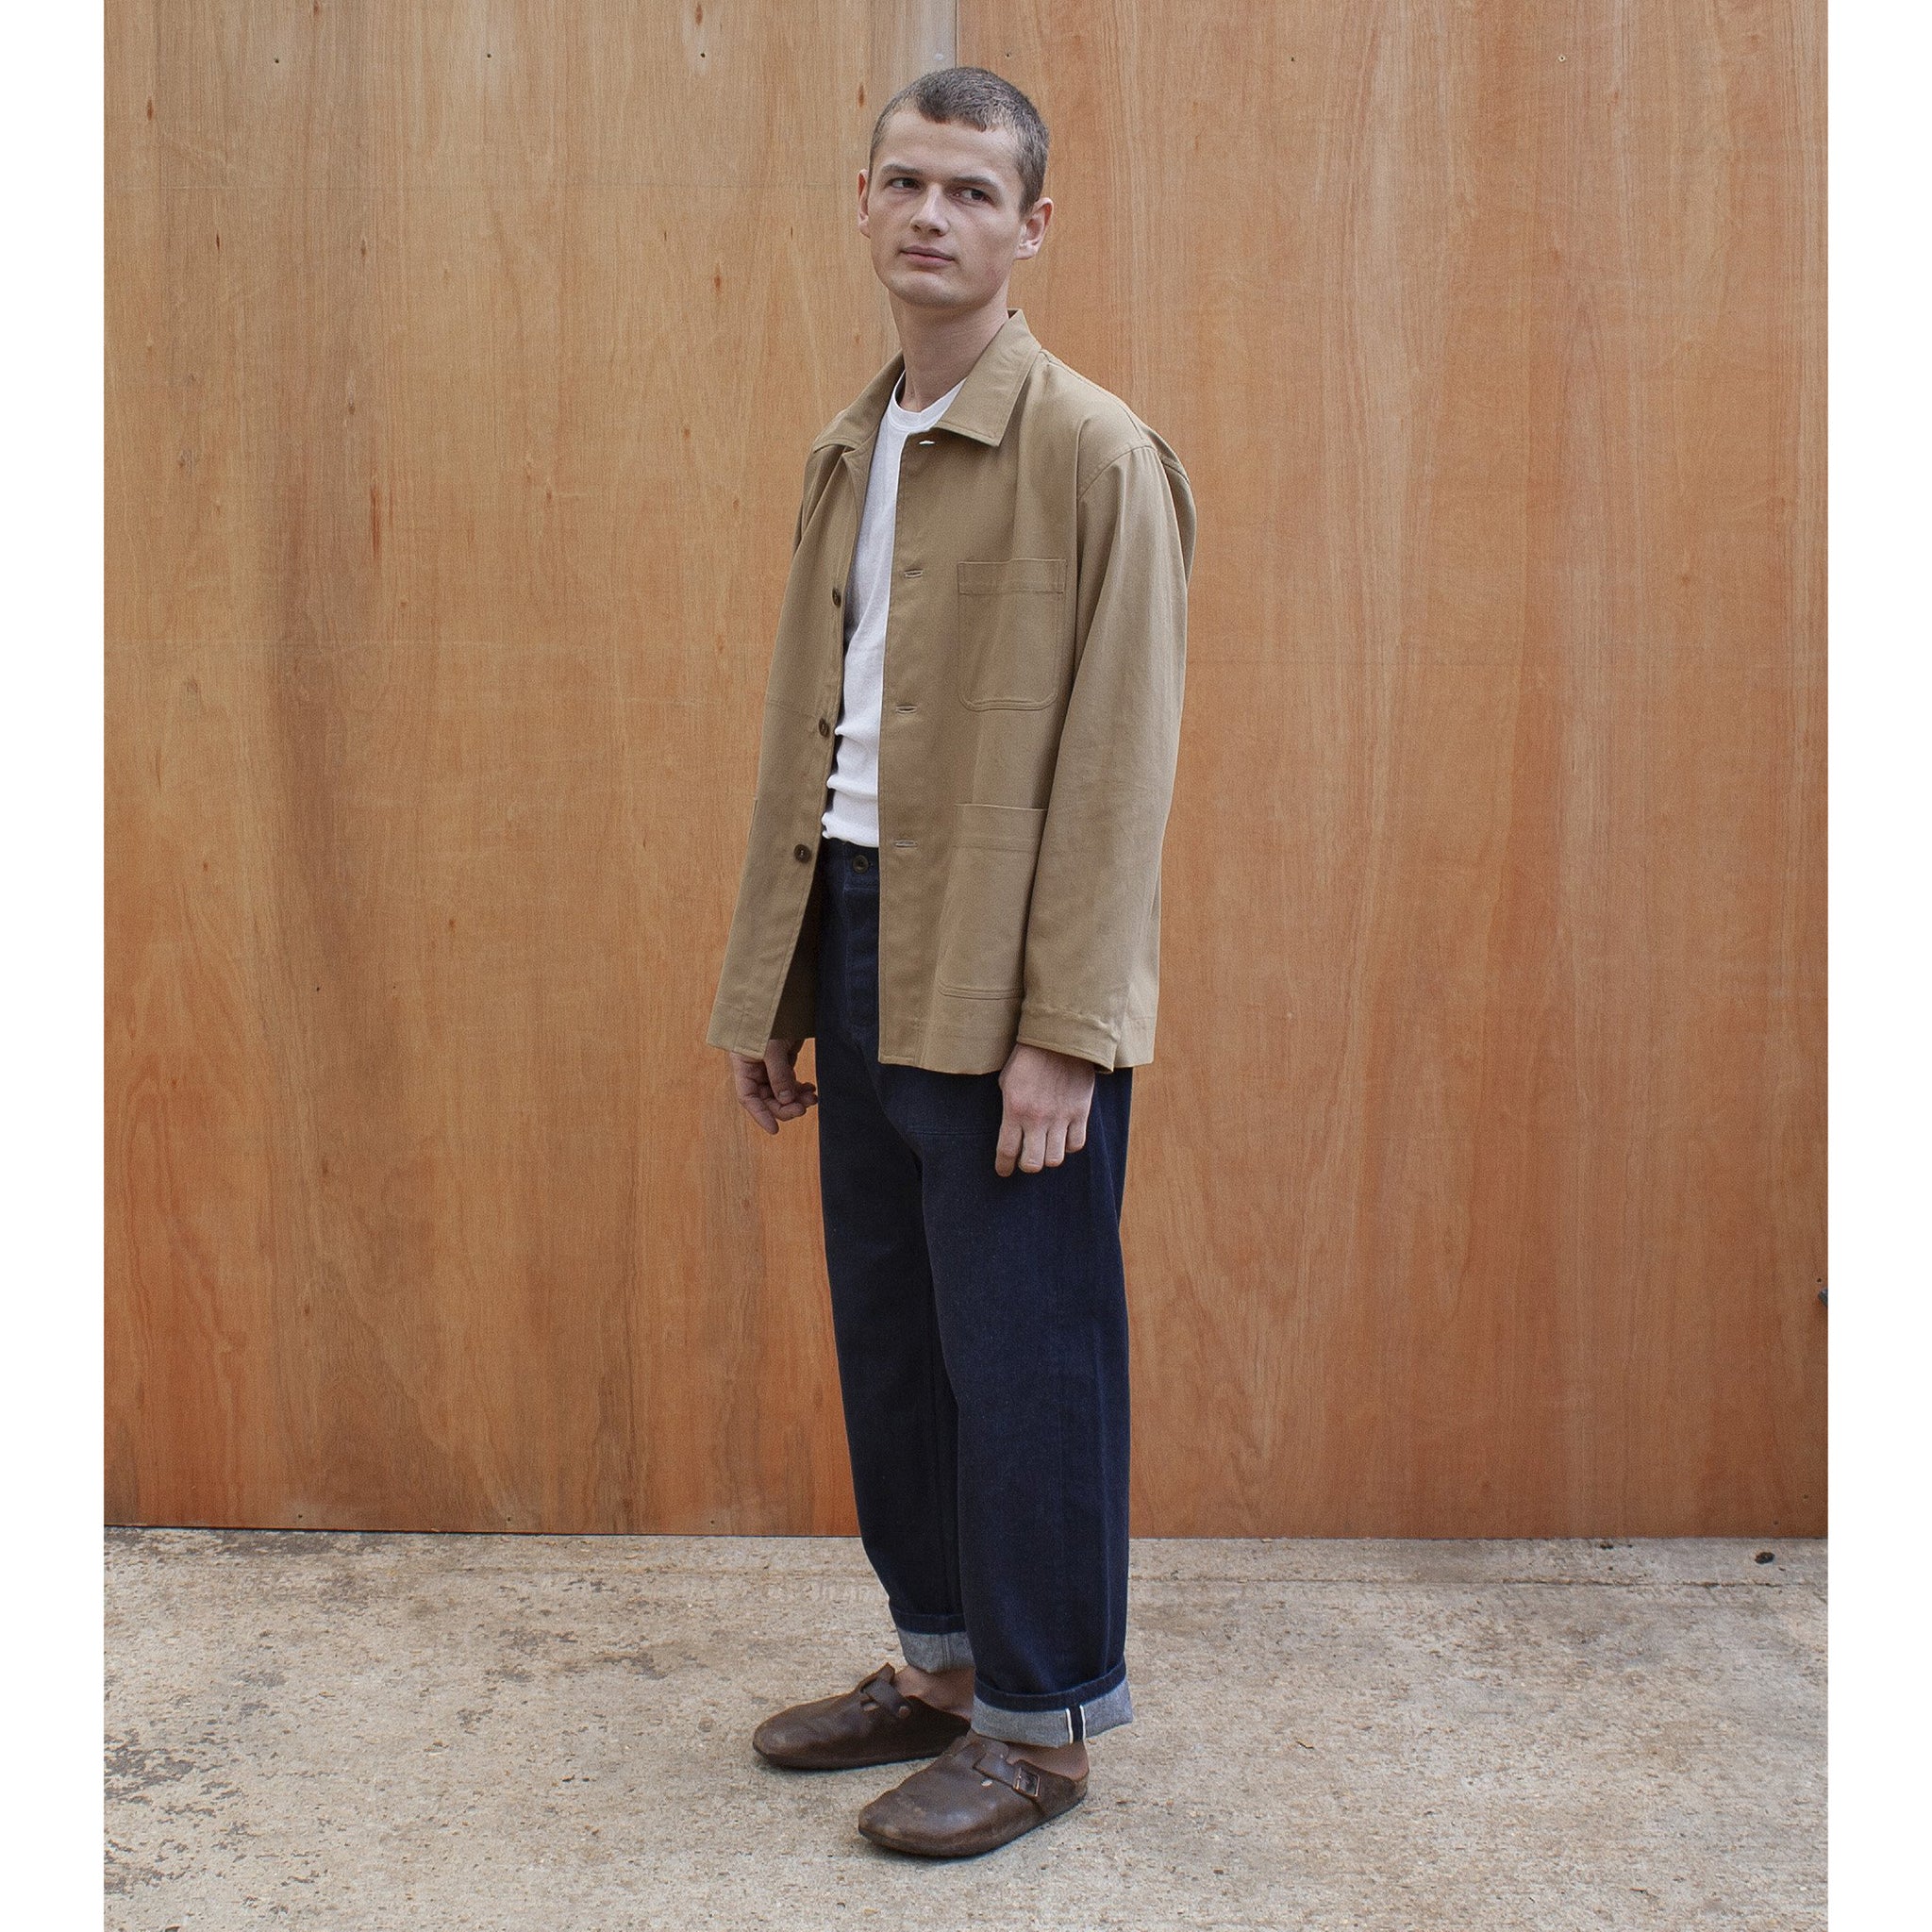 a young man standing against a wooden wall wearing a traditional chore jacket made in a sustainable tan brushed cotton canvas  Edit alt text